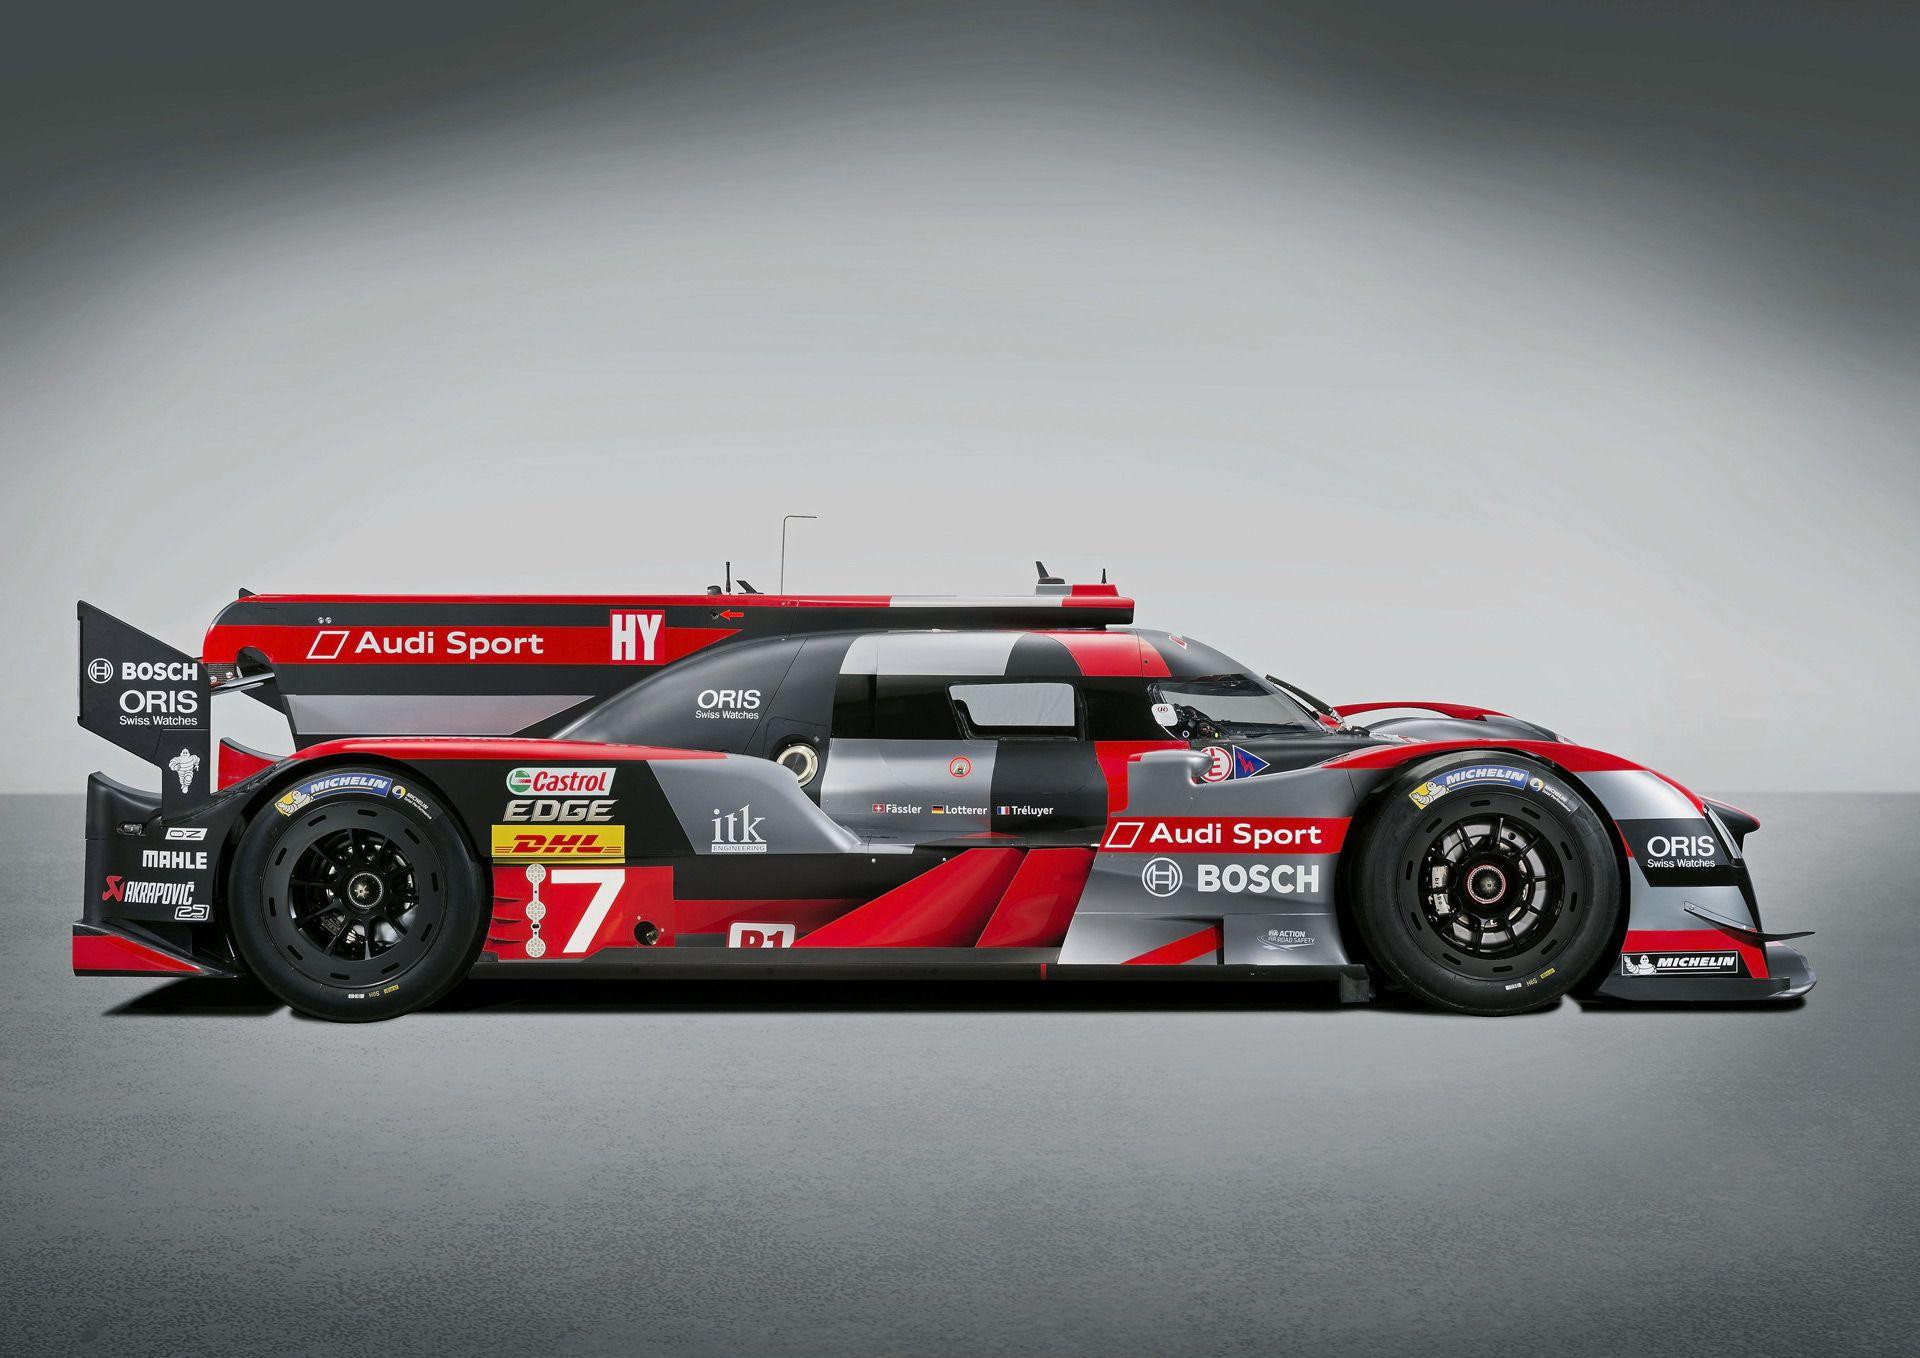 R18 LMP1 is Audi's most powerful and efficient racer ever